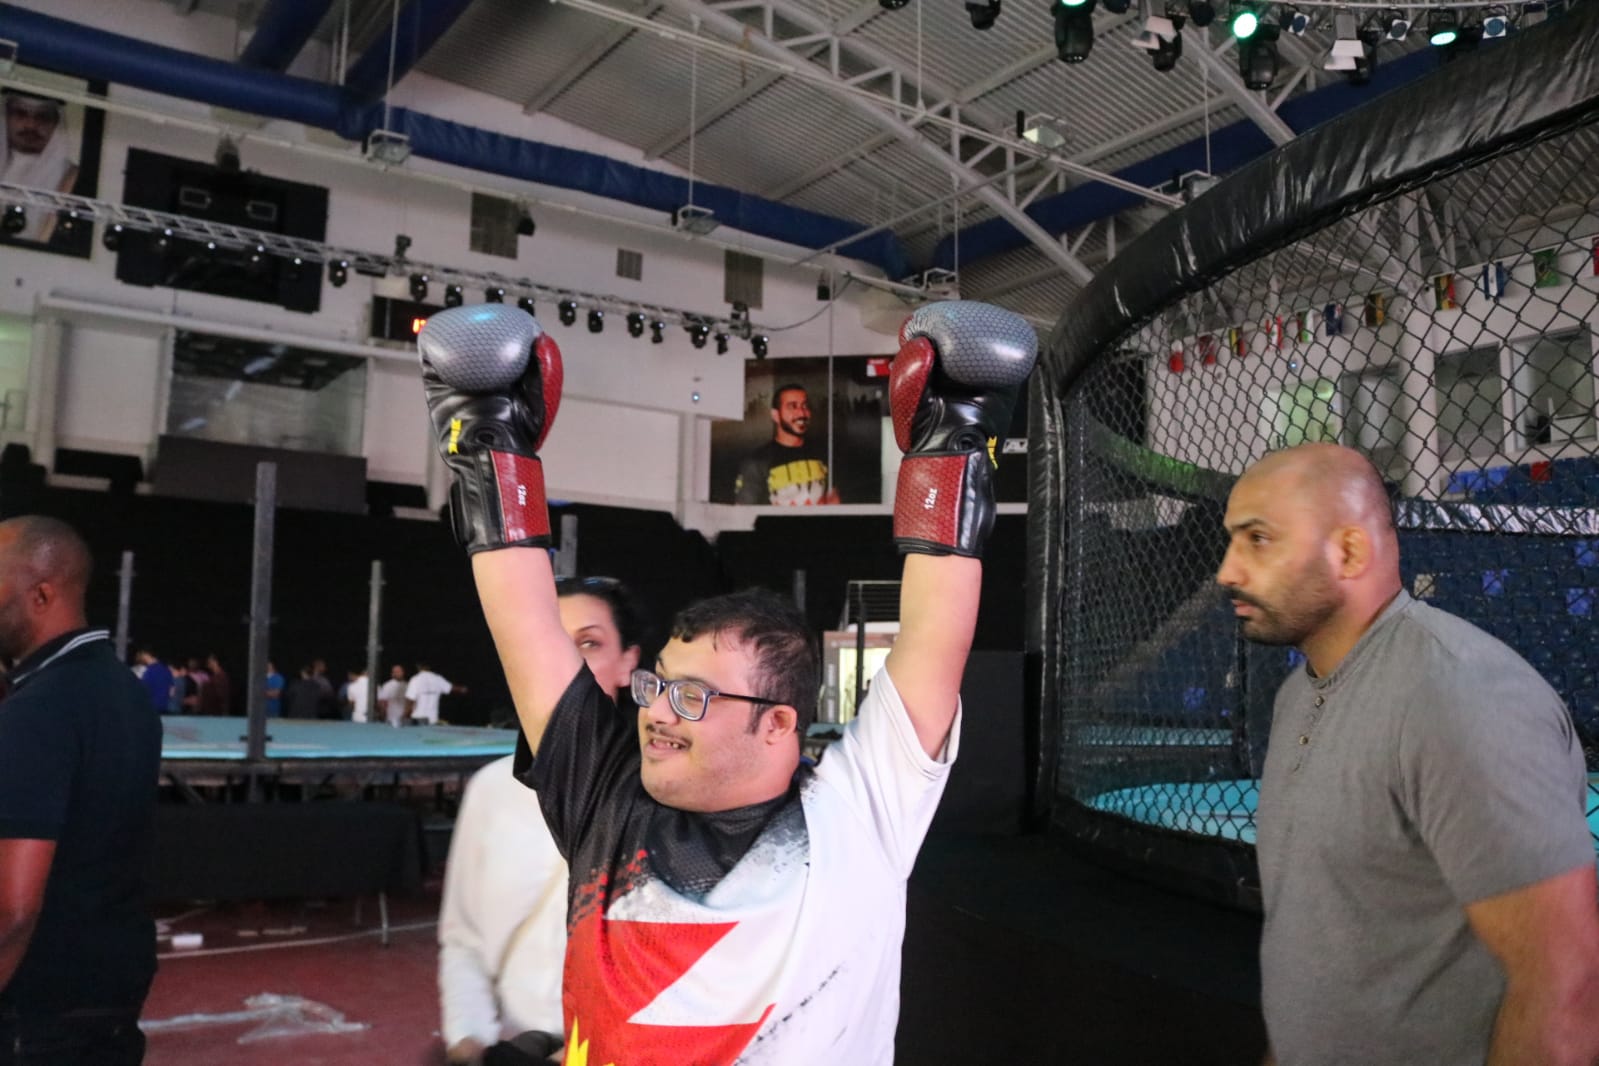 HH Sheikh Khalid makes the dream of Buhaz’a a reality at Asia’s Largest Combat Sports Event